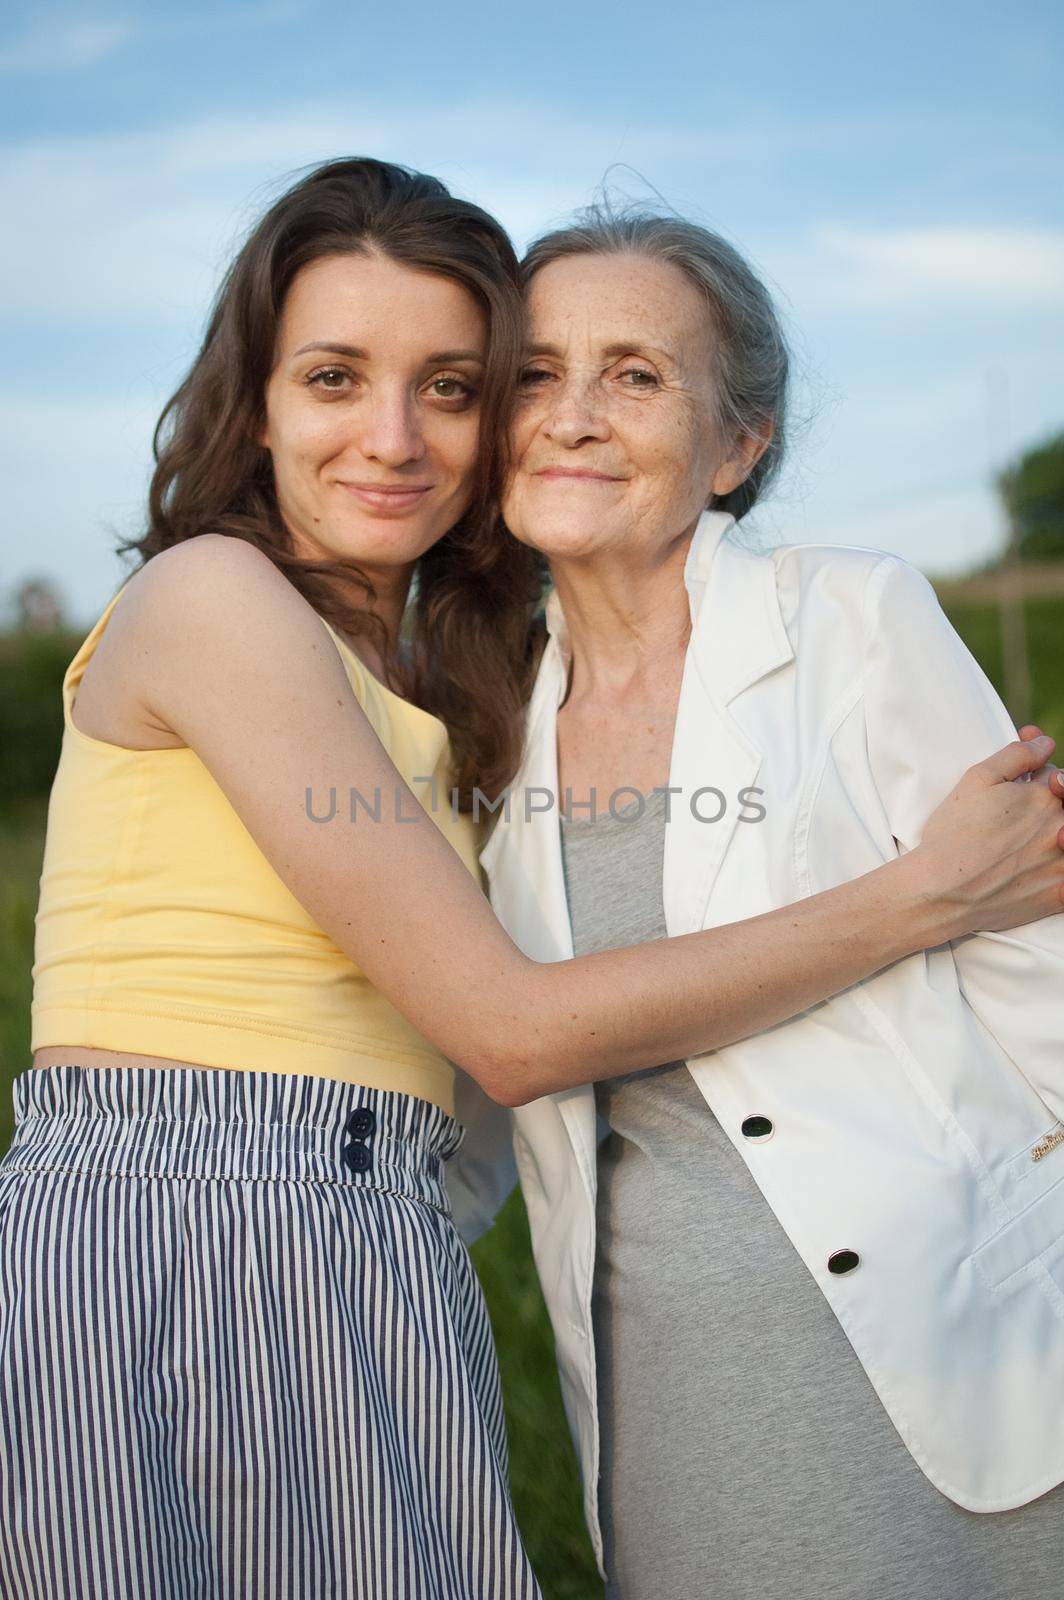 Senior mother with gray hair with her adult daughter looking at the camera in the garden and hugging each other during sunny day outdoors, mothers day concept